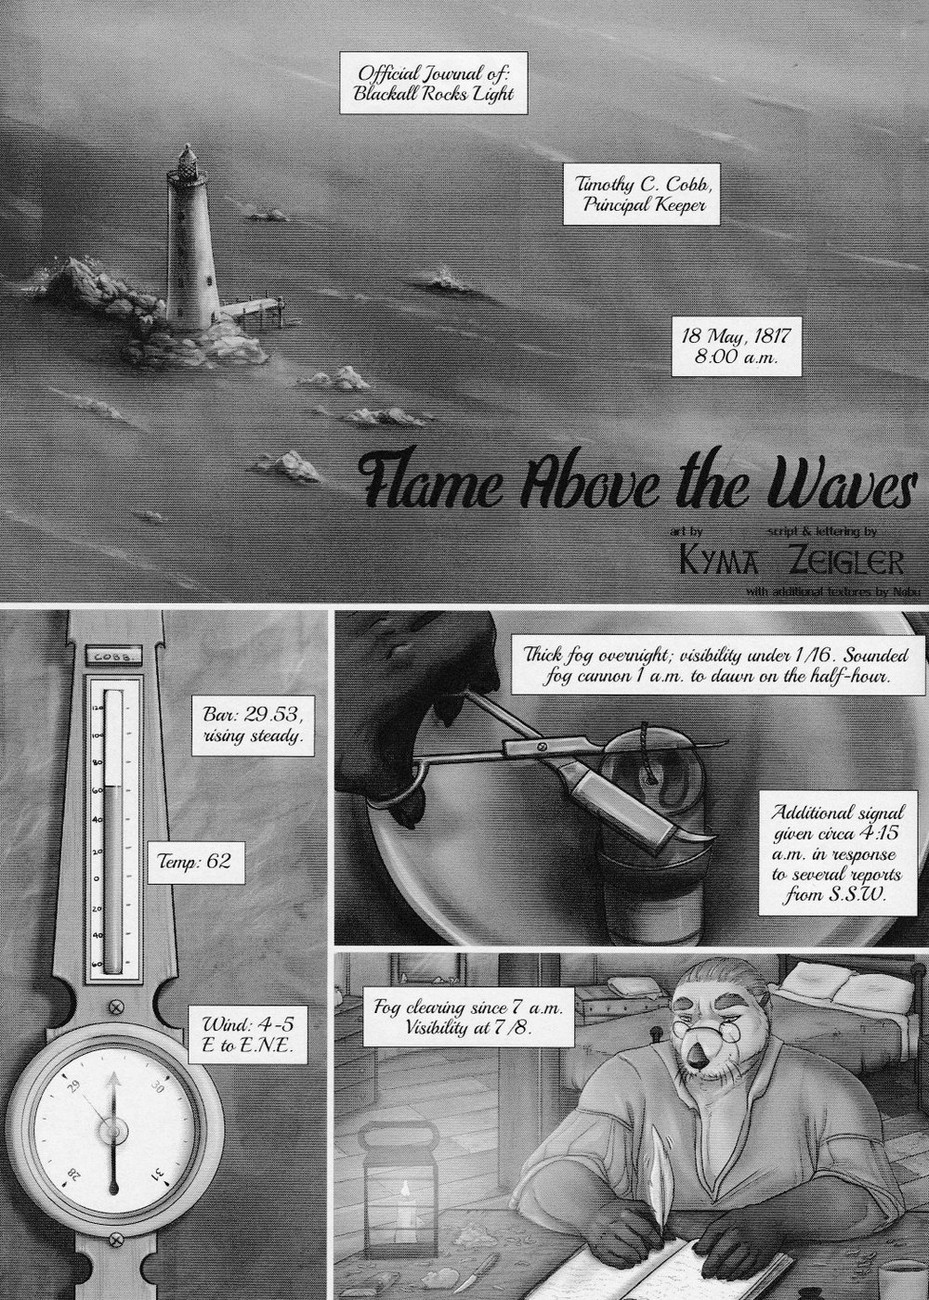 Cover Flame Above The Waves